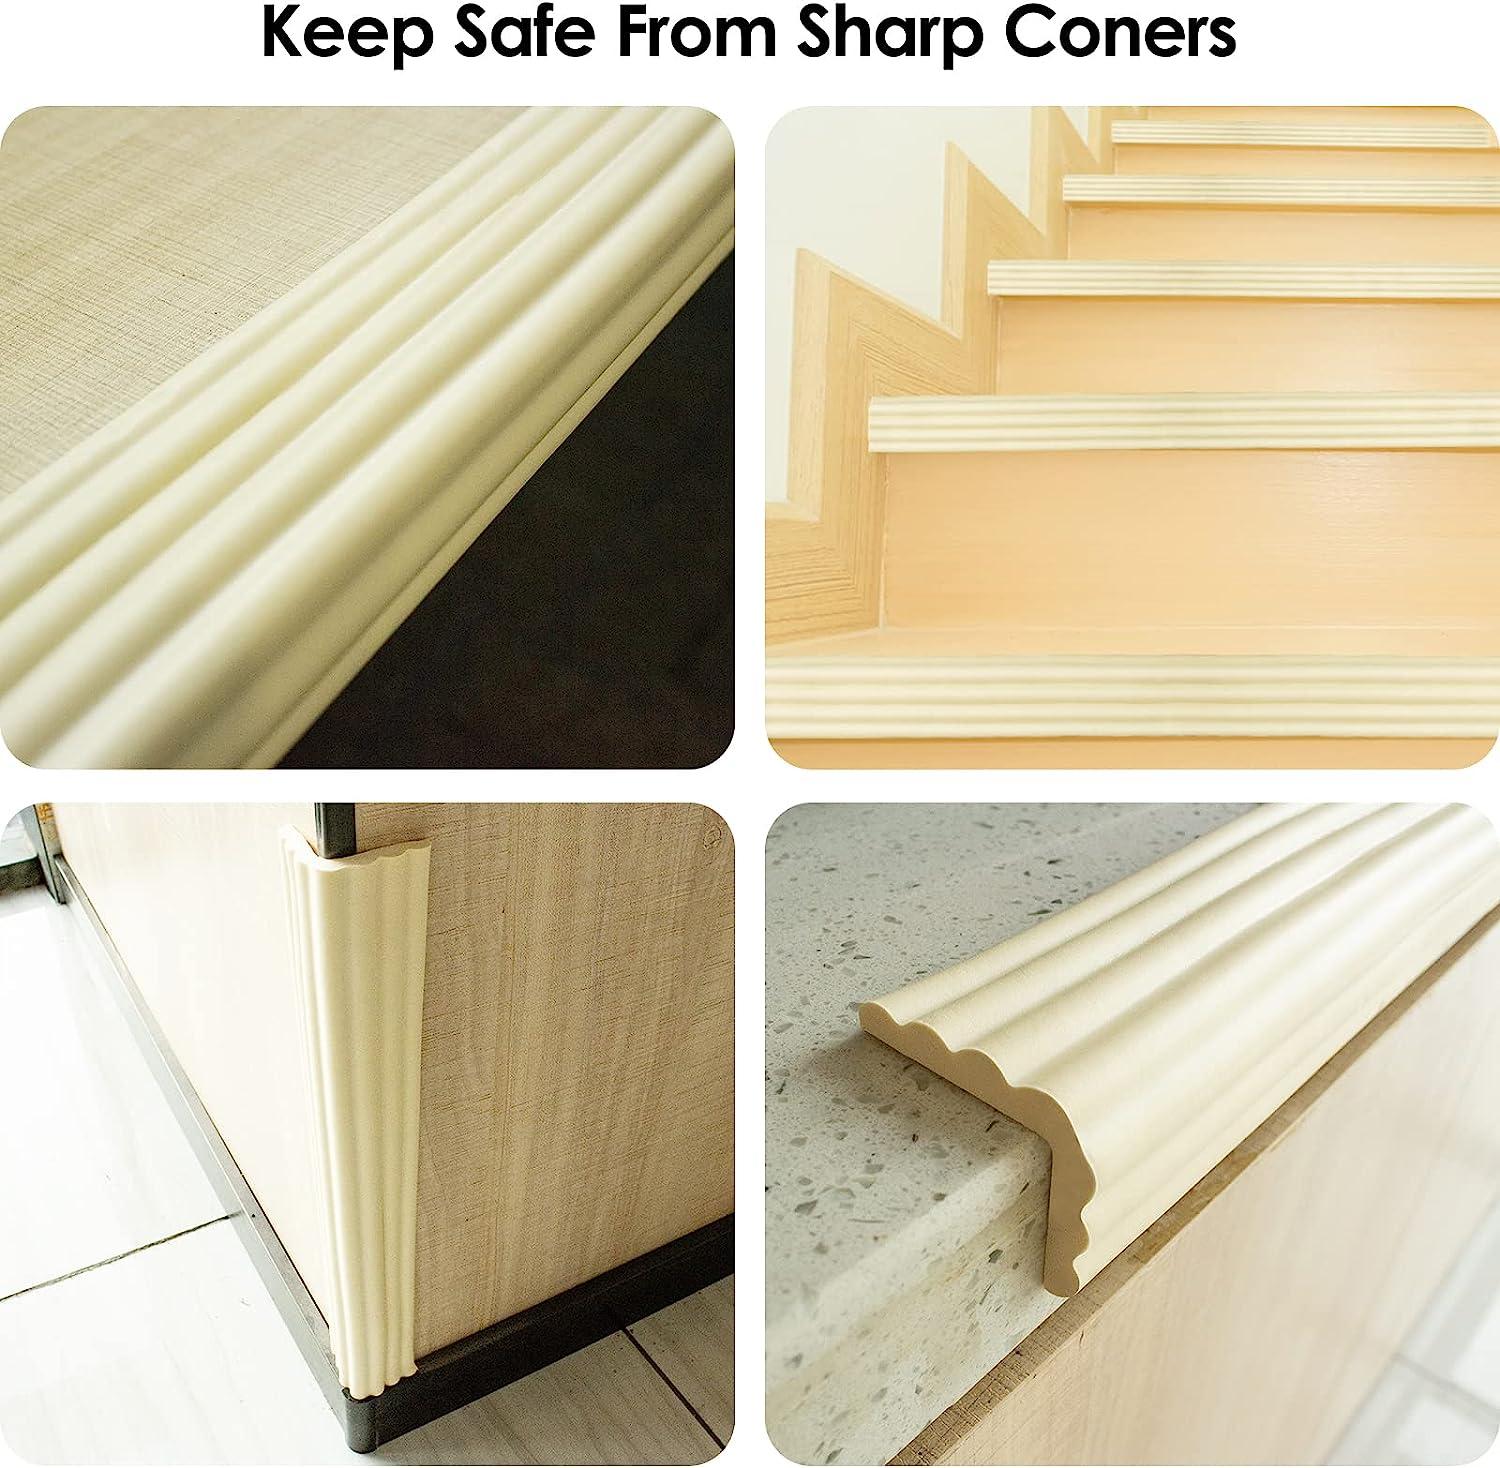 Corner Protector, Baby Proofing Table Corner Guards, Keep Child Safe,  Protectors For Furniture Sharp Corners (18